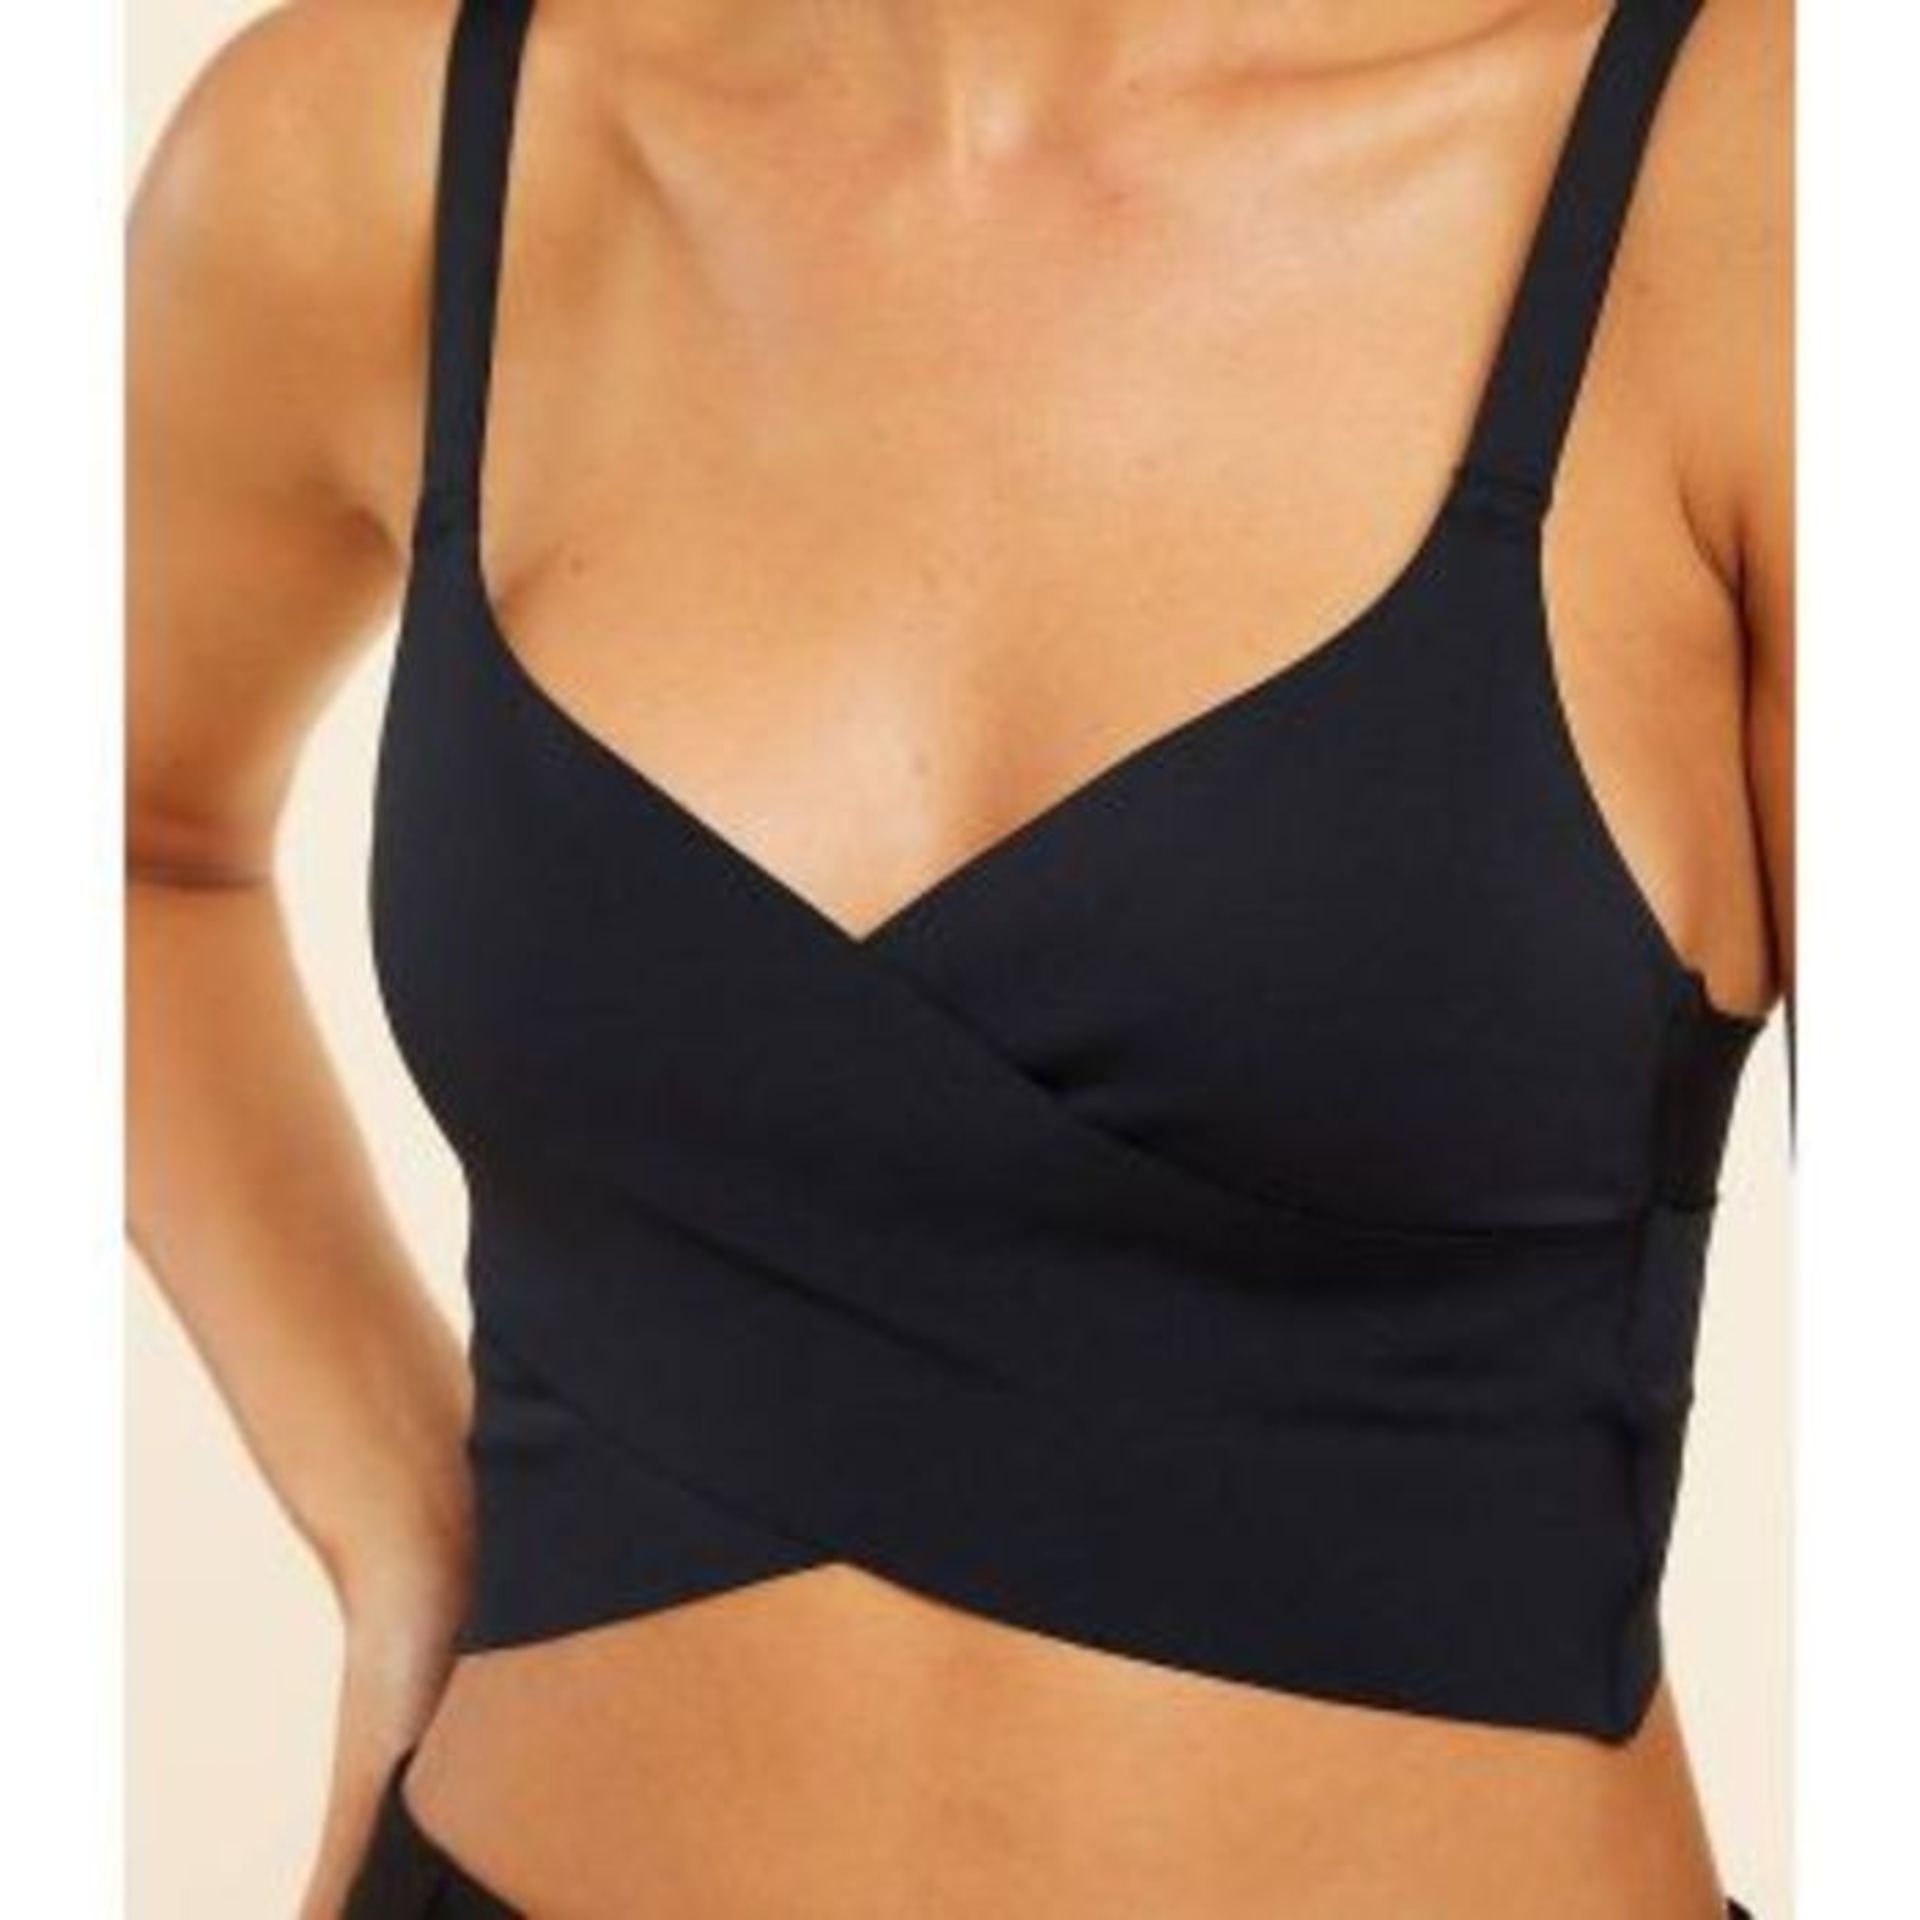 ETAM - 24 HOURS WRAPOVER BRALETTE WITHOUT UNDERWIRING - BLACK - SIZE: XS (UK 6). RRP £36.00 AS NEW